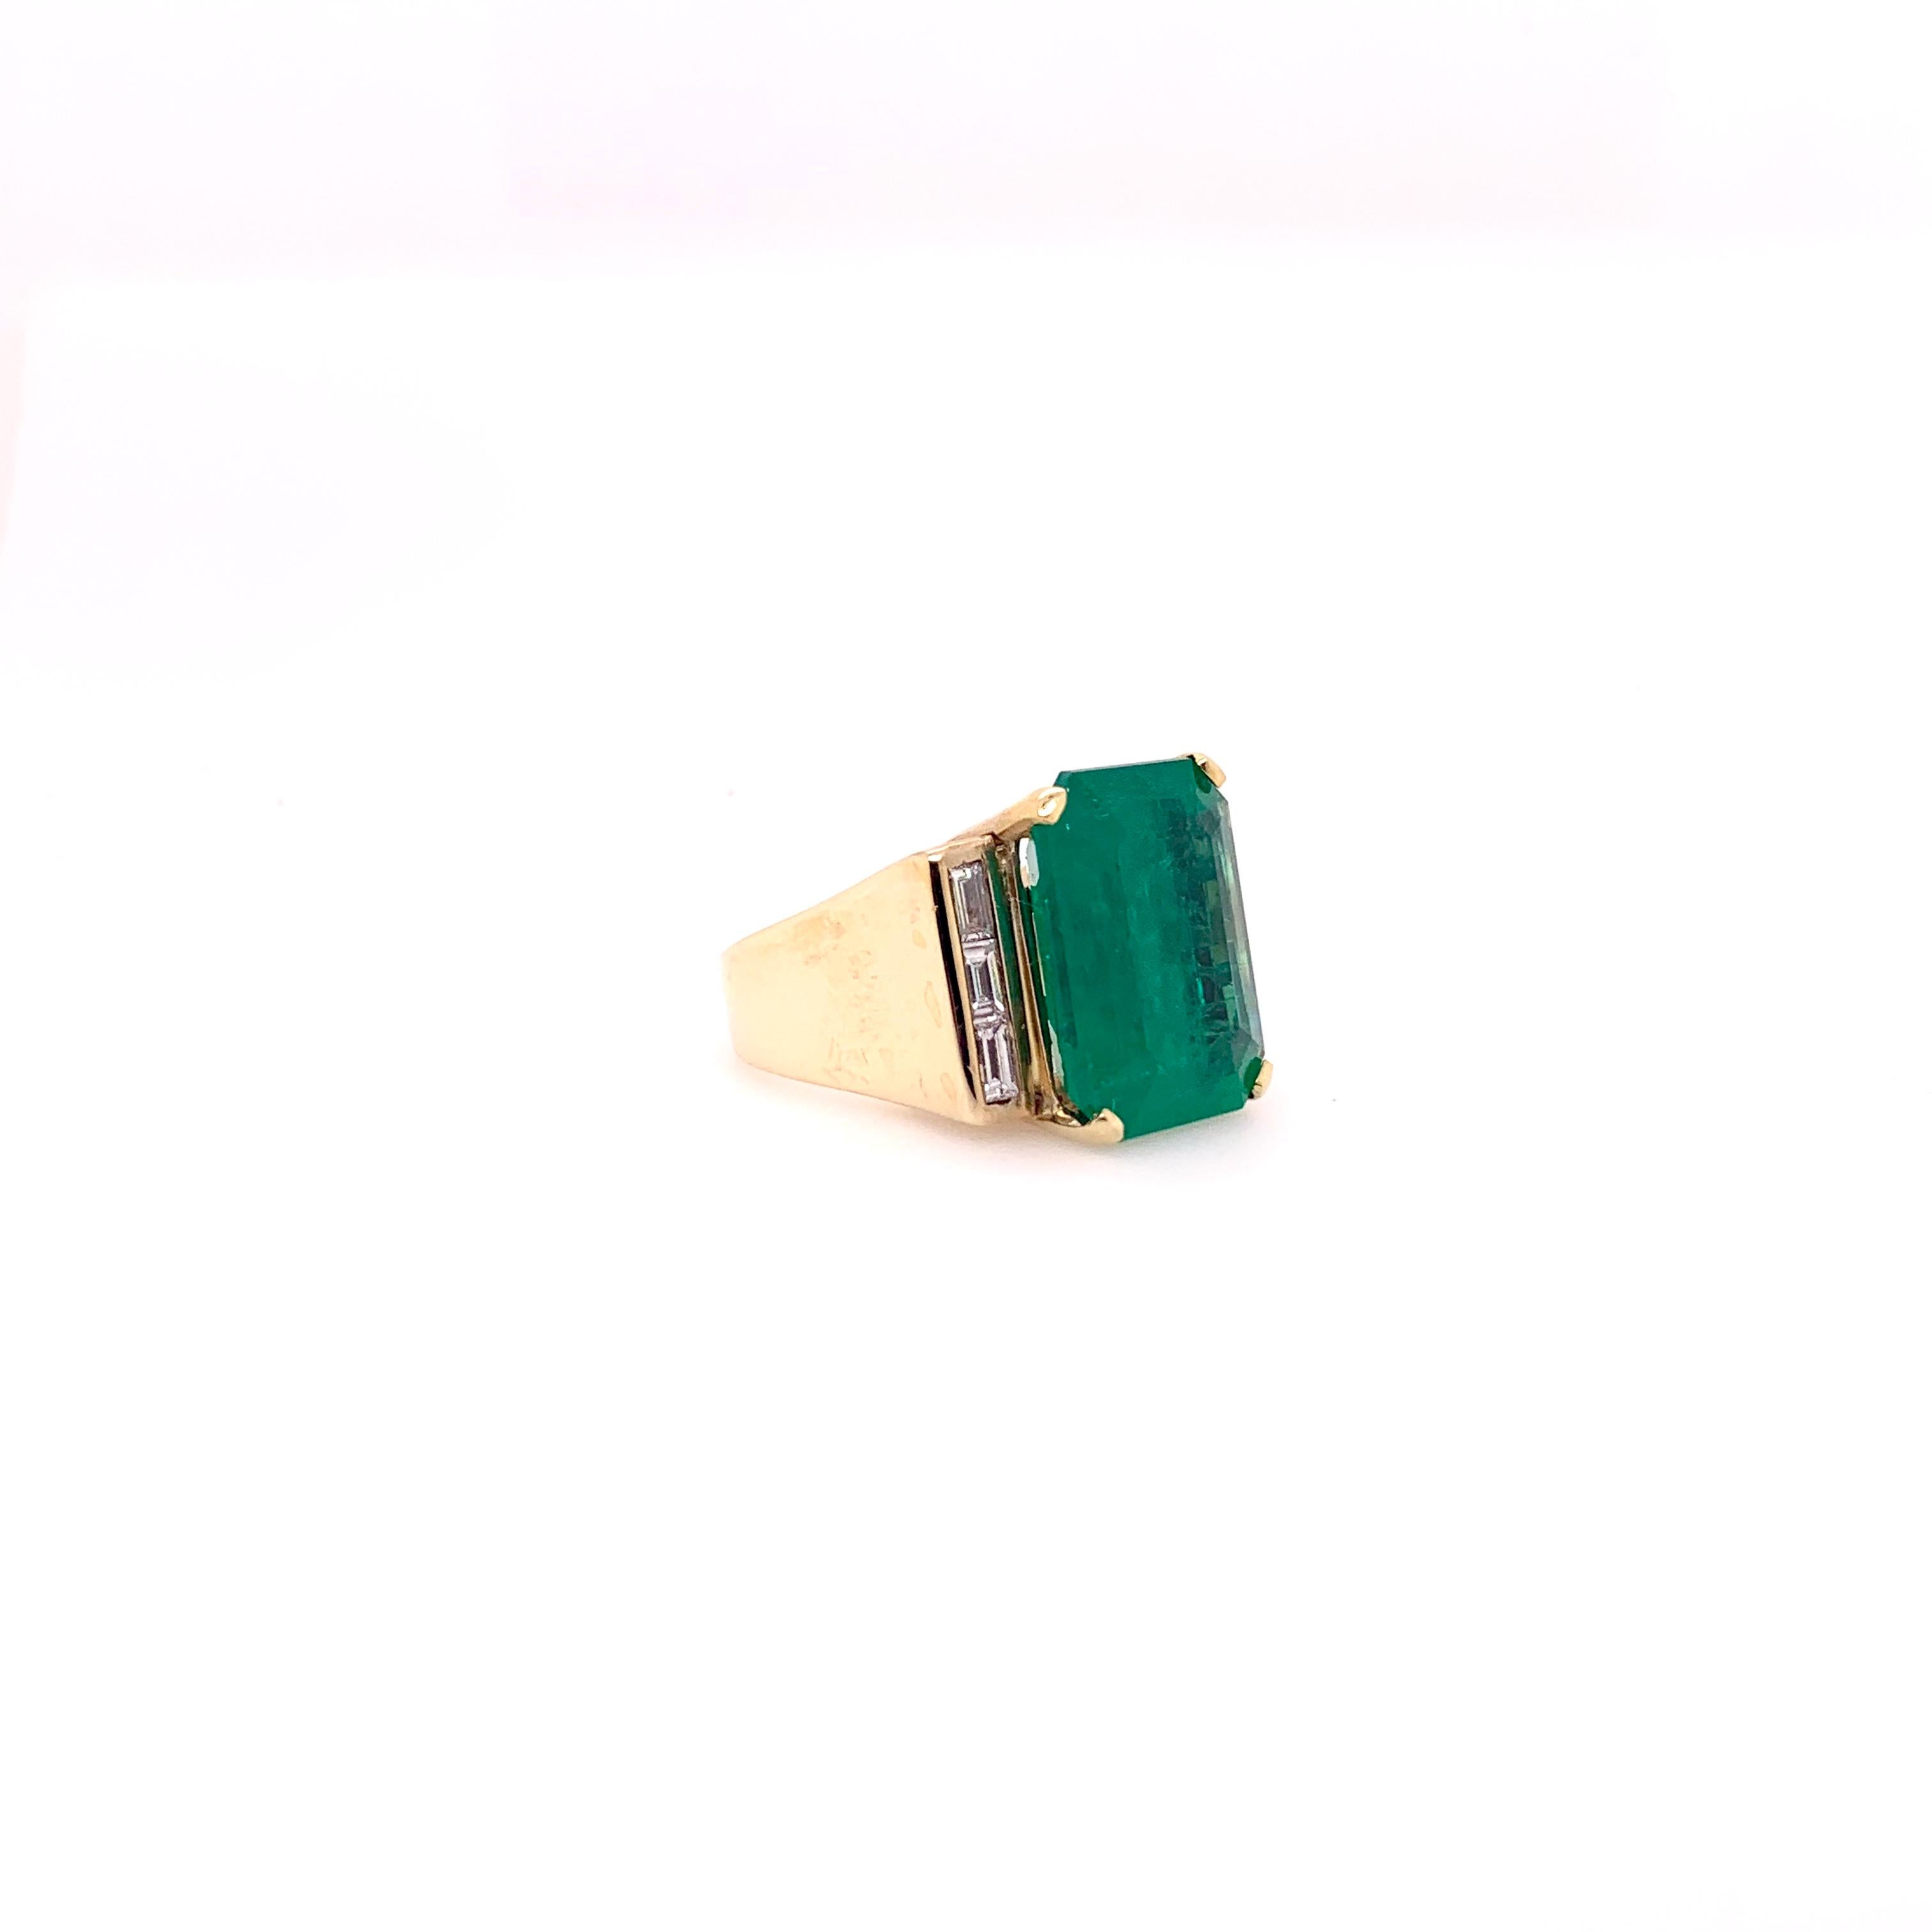 Contemporary GIA Certified 18.07 Carat Columbian Emerald Diamond Ring For Sale